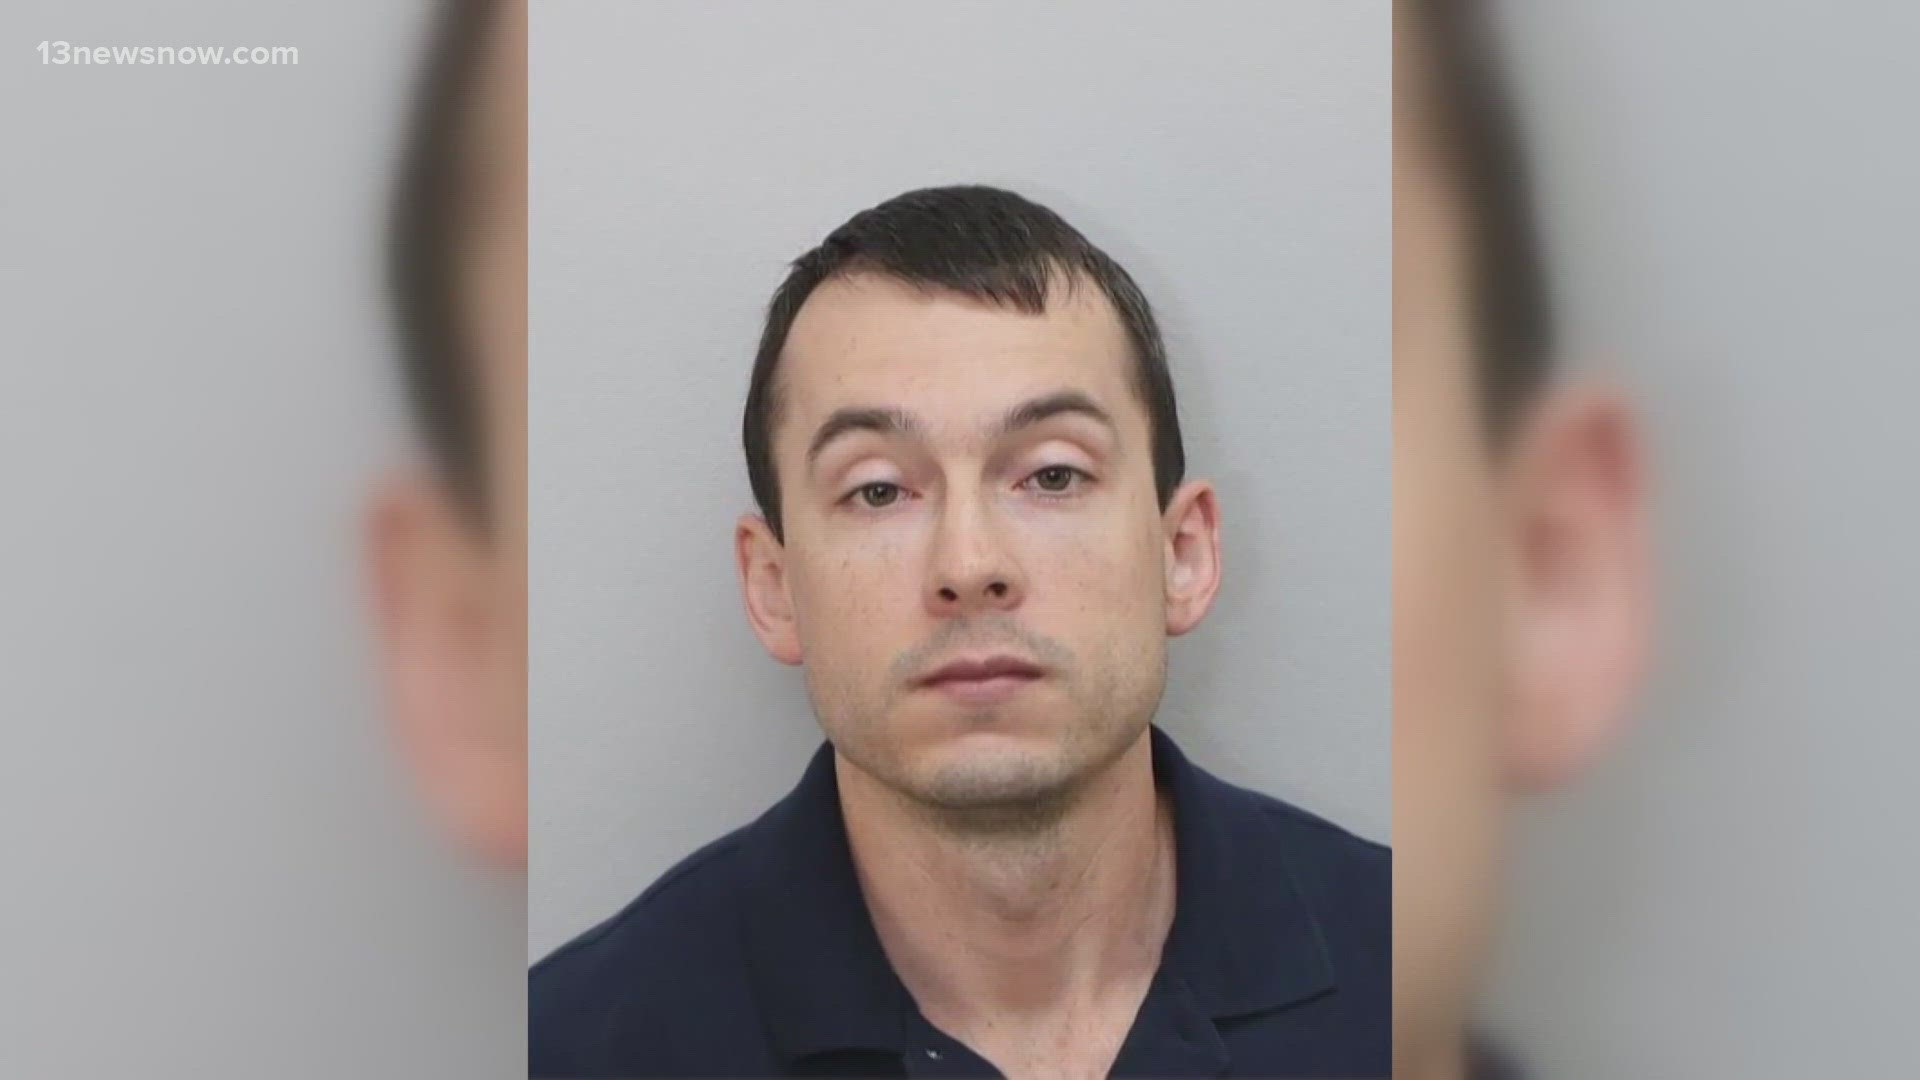 Man facing child porn charges in Virginia Beach appears in court 13newsnow